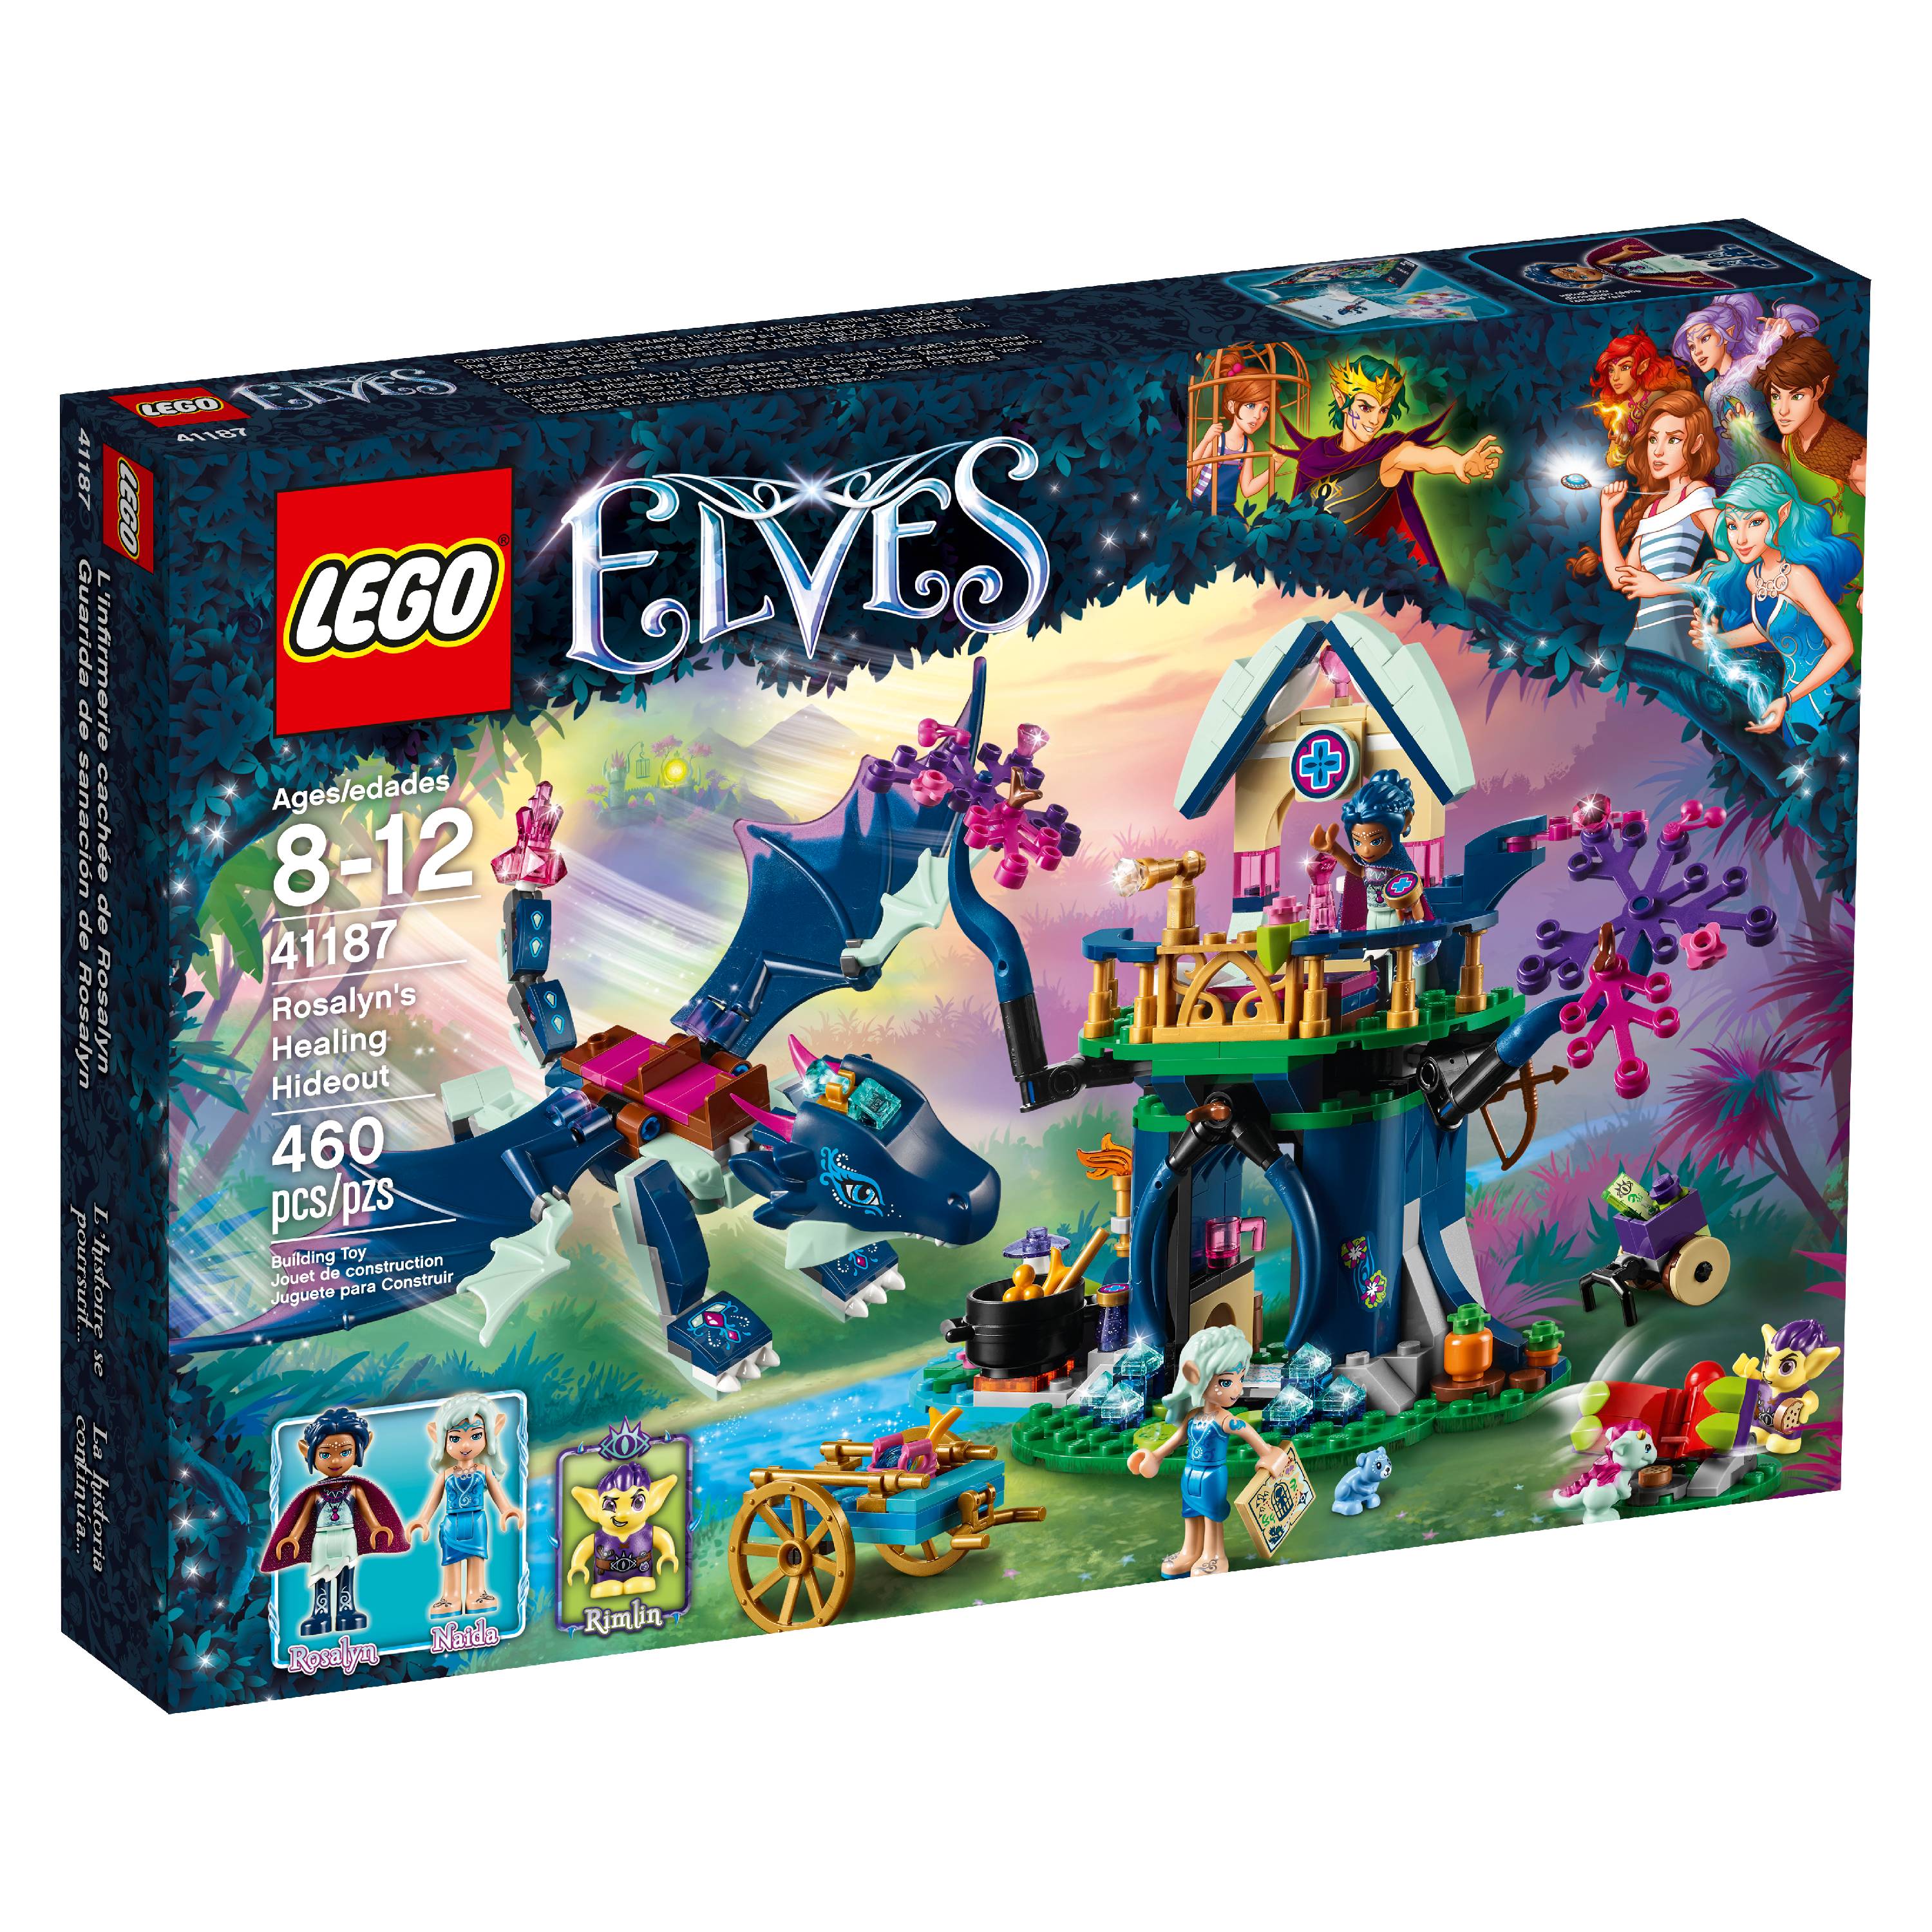 LEGO Elves Rosalyn's Healing Hideout 41187 (460 Pieces) - image 5 of 6